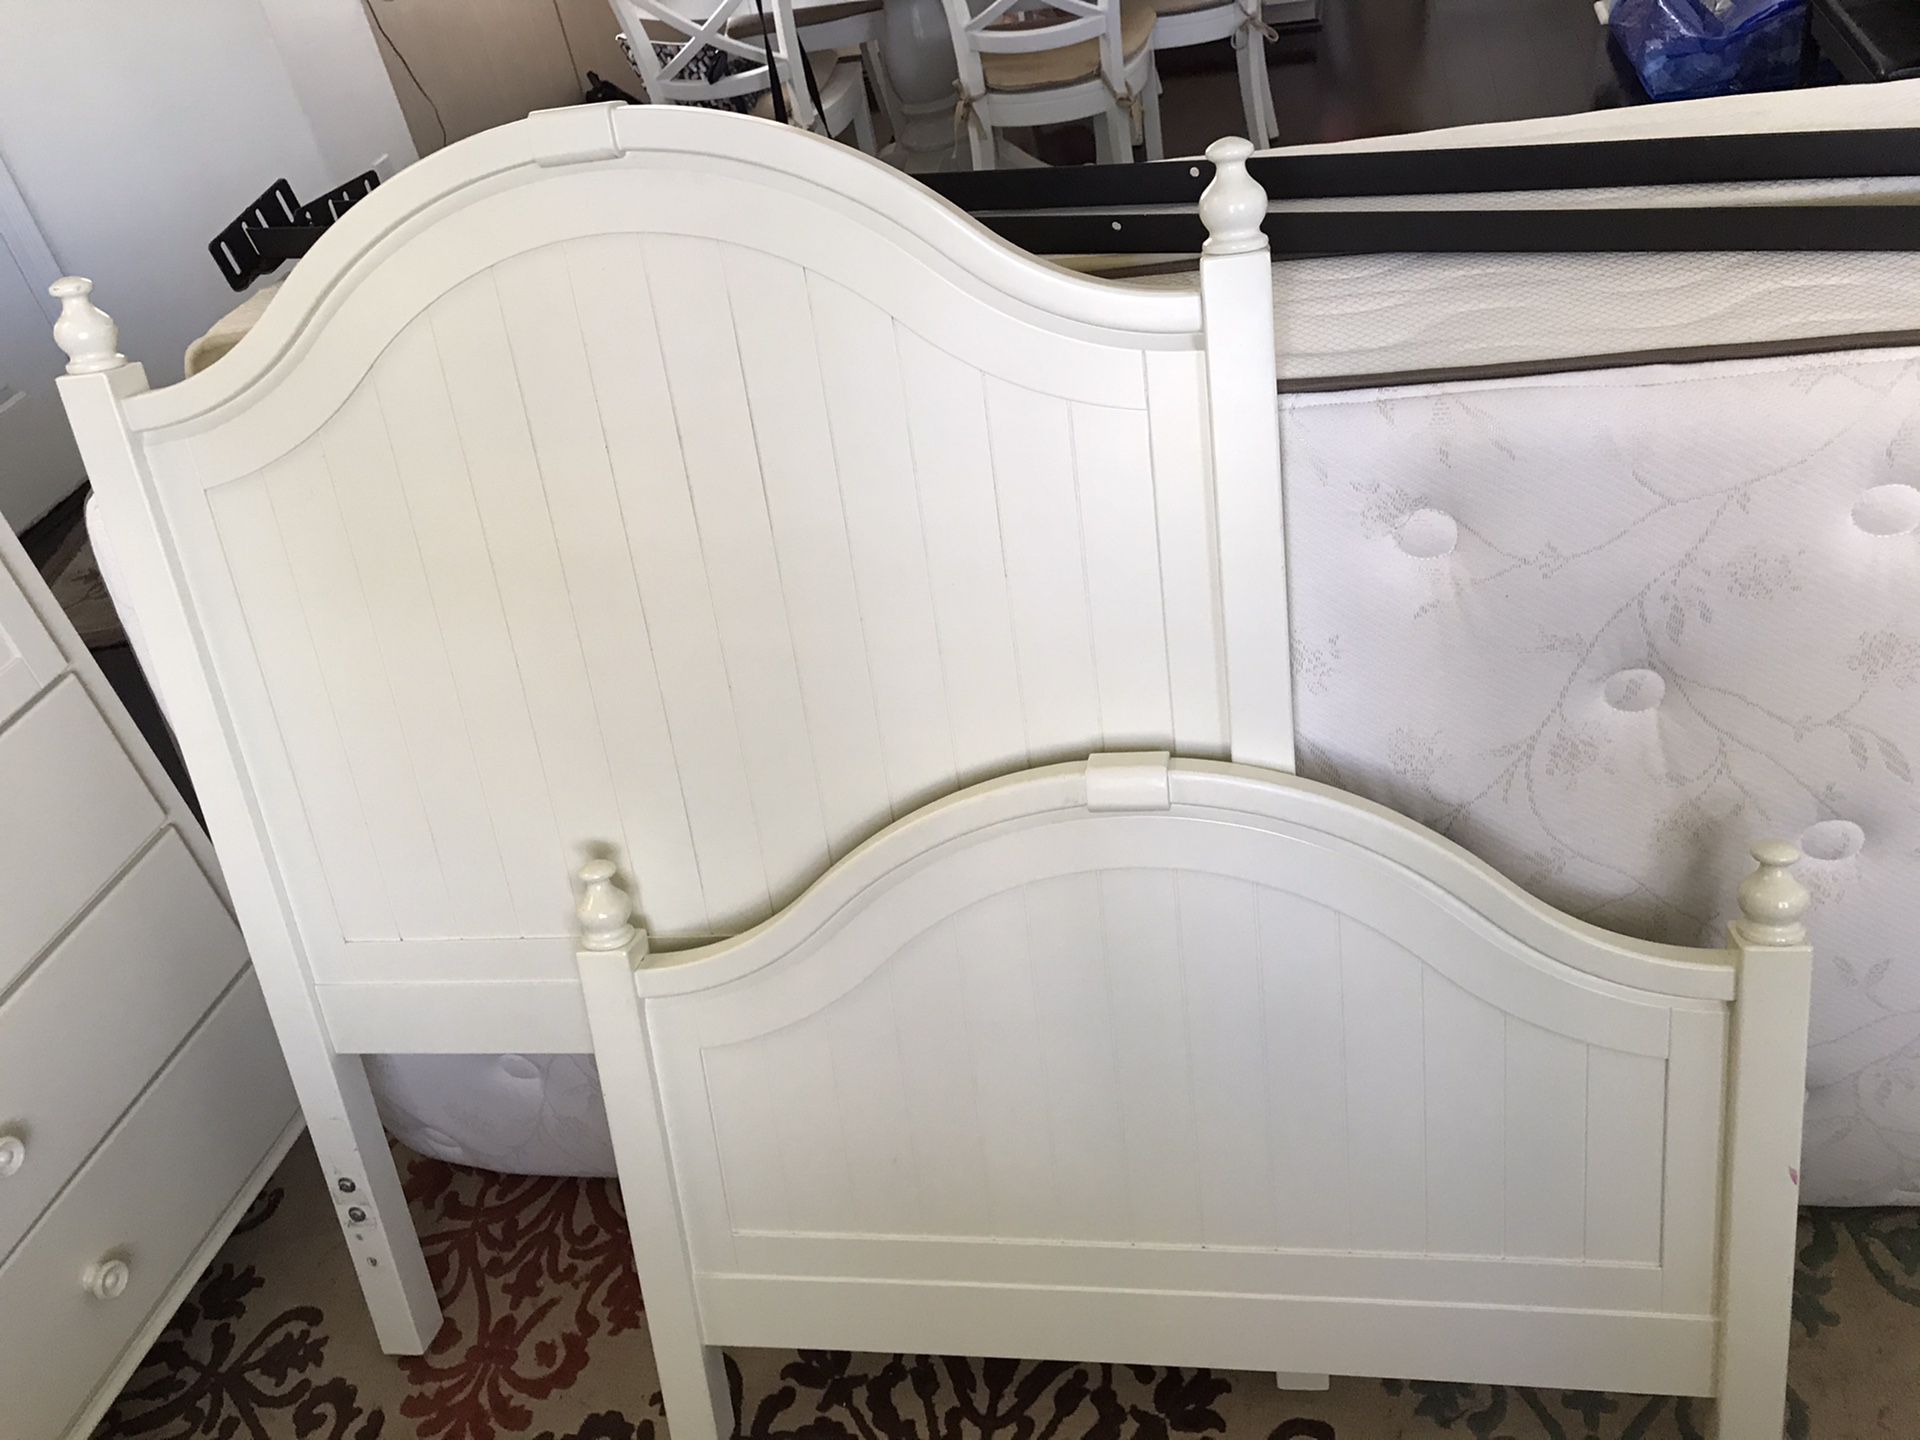 JC Penney McKenna Twin bed and dresser set in good condition - free!